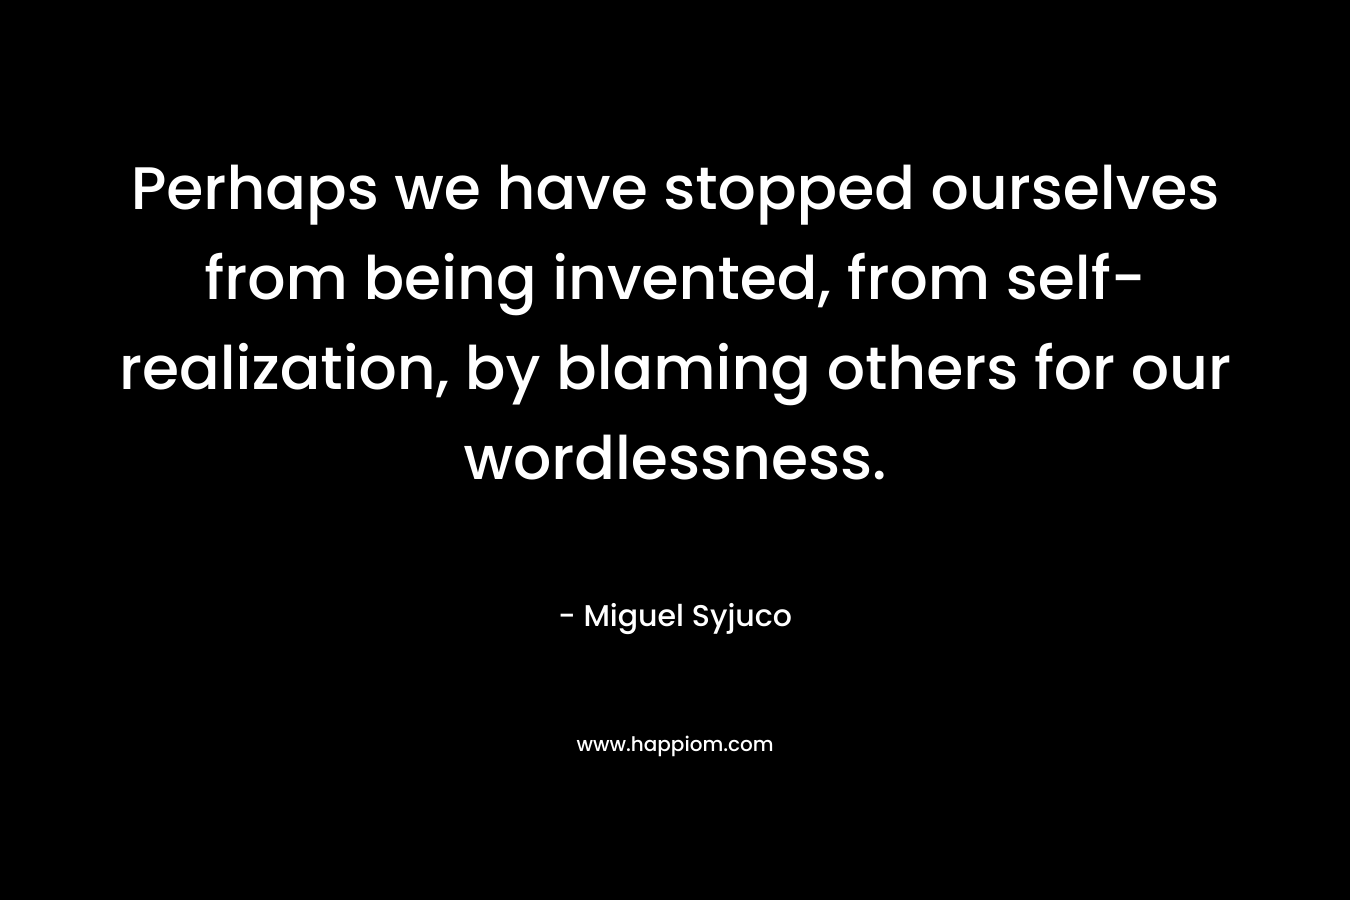 Perhaps we have stopped ourselves from being invented, from self-realization, by blaming others for our wordlessness. – Miguel Syjuco